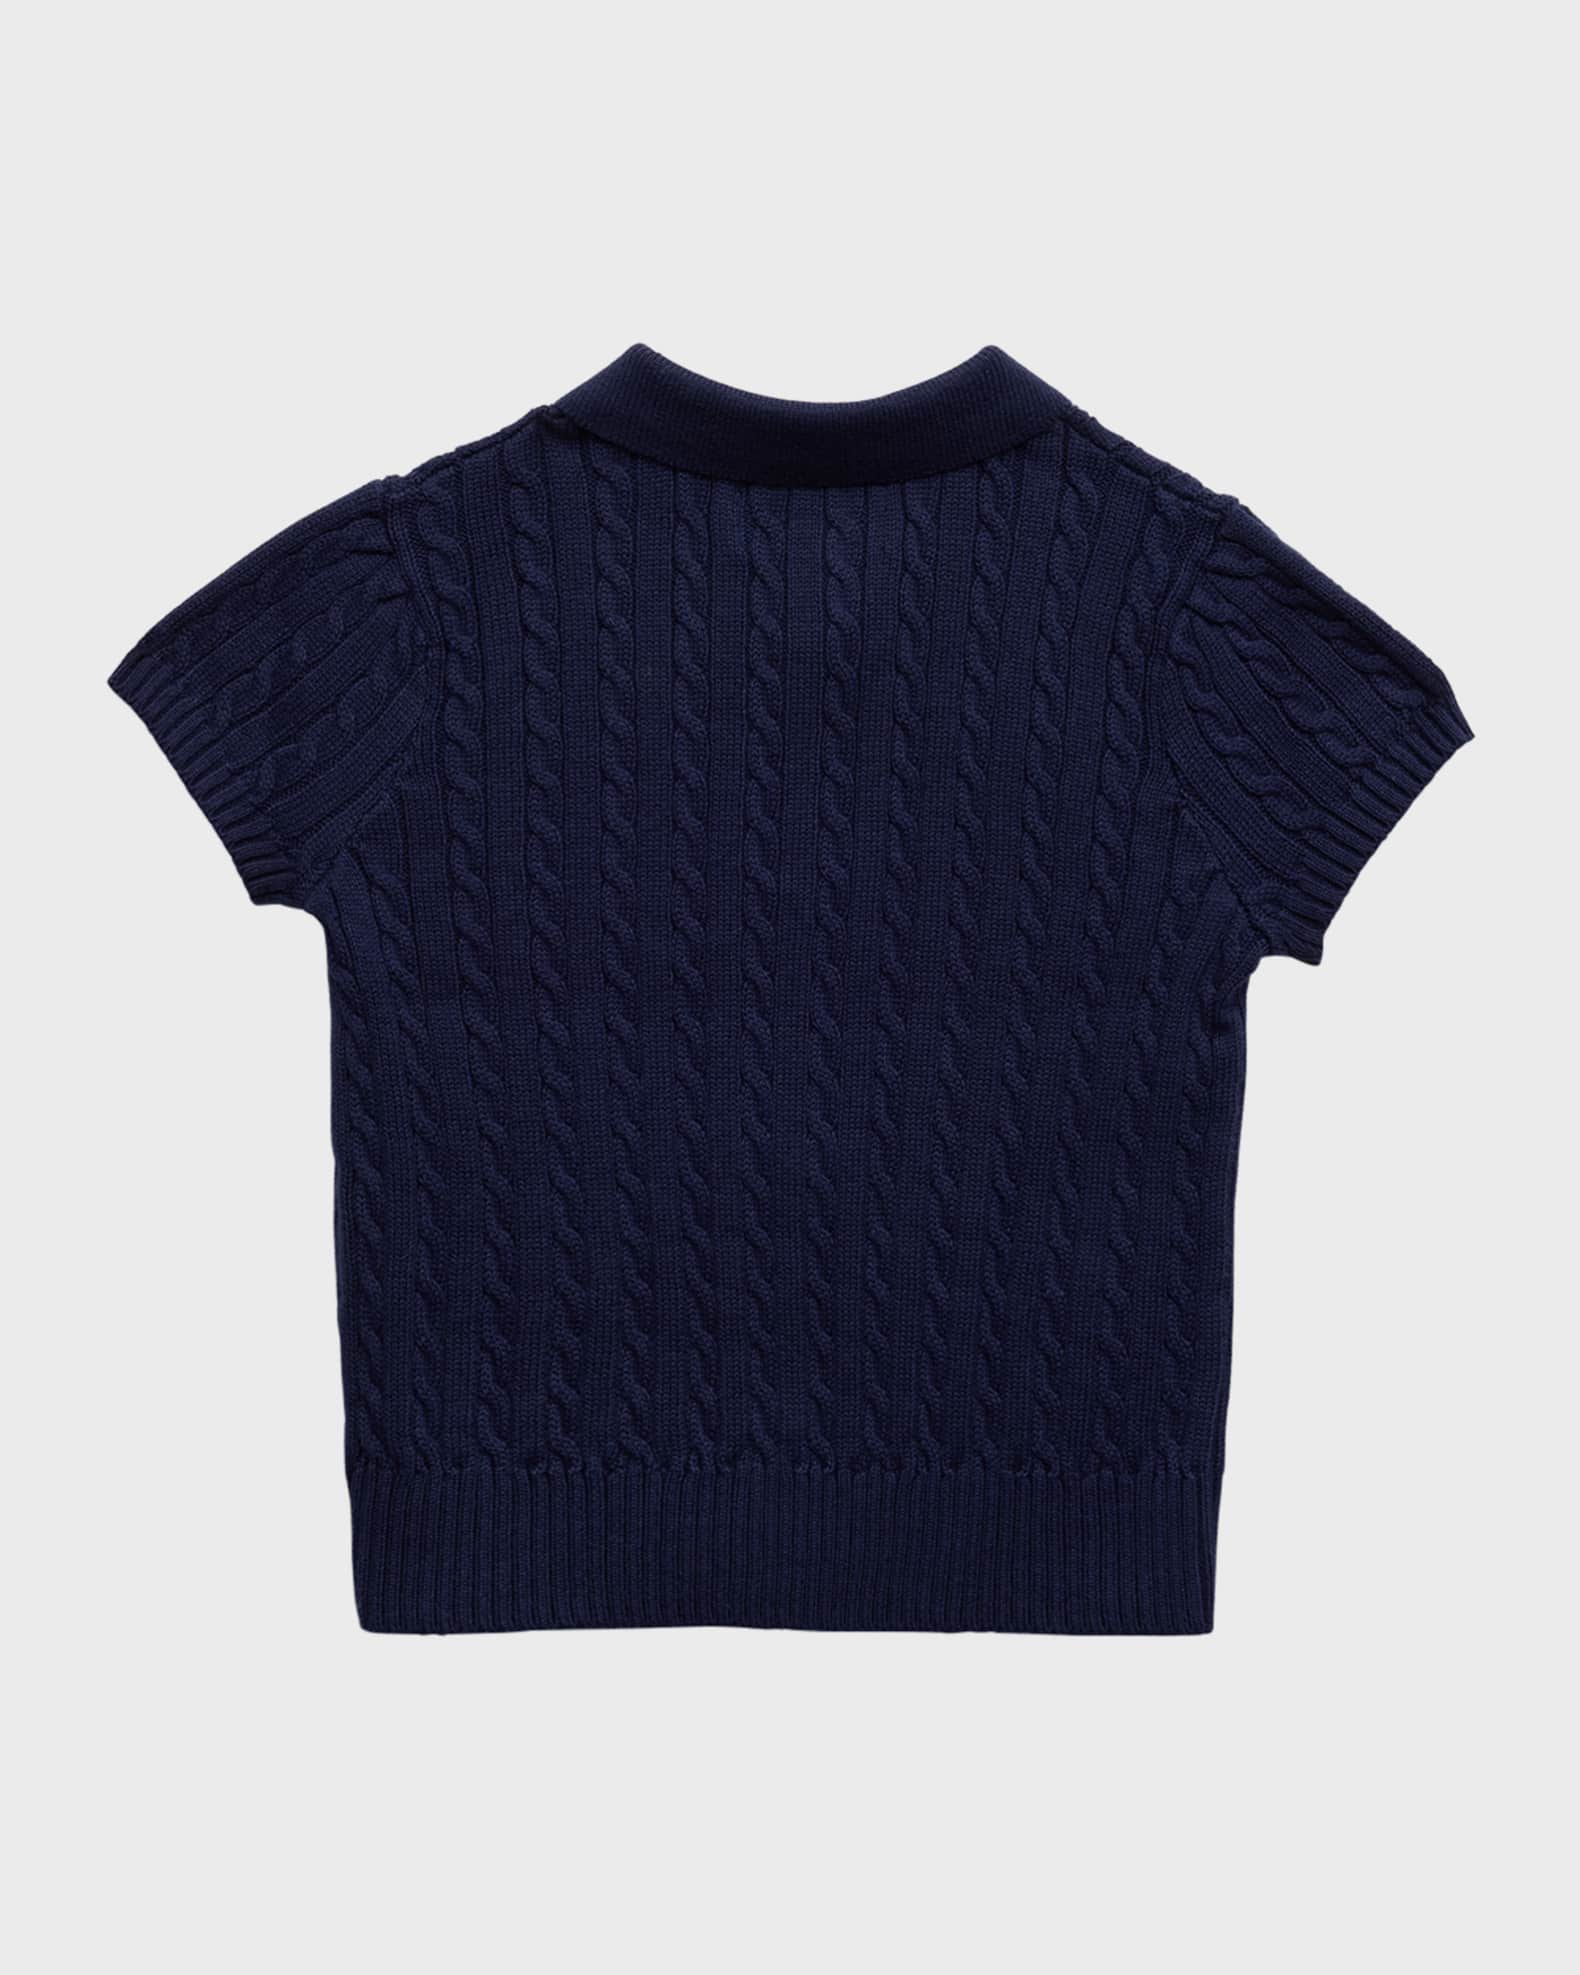 Ralph Lauren Childrenswear Girl's Cotton Mini Cable-Knit Short-Sleeve Polo Sweater, Size 3-6X, Newport Navy, 5, Toddler Girls Apparel Sweaters